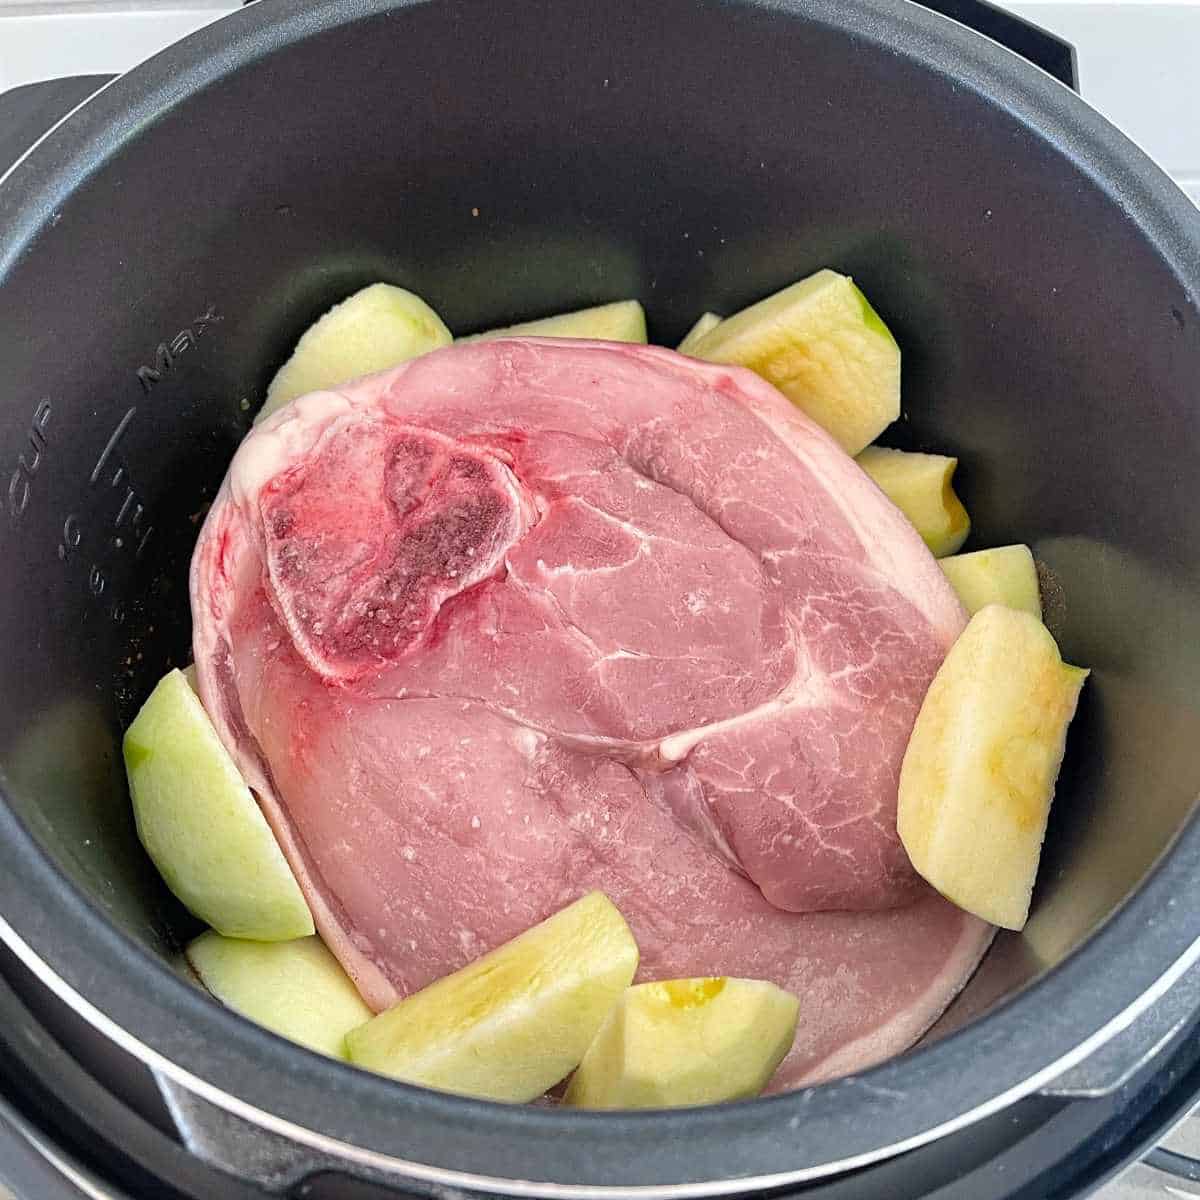 Ingredients for pulled pork and apple pie sitting inside the pressure cooker